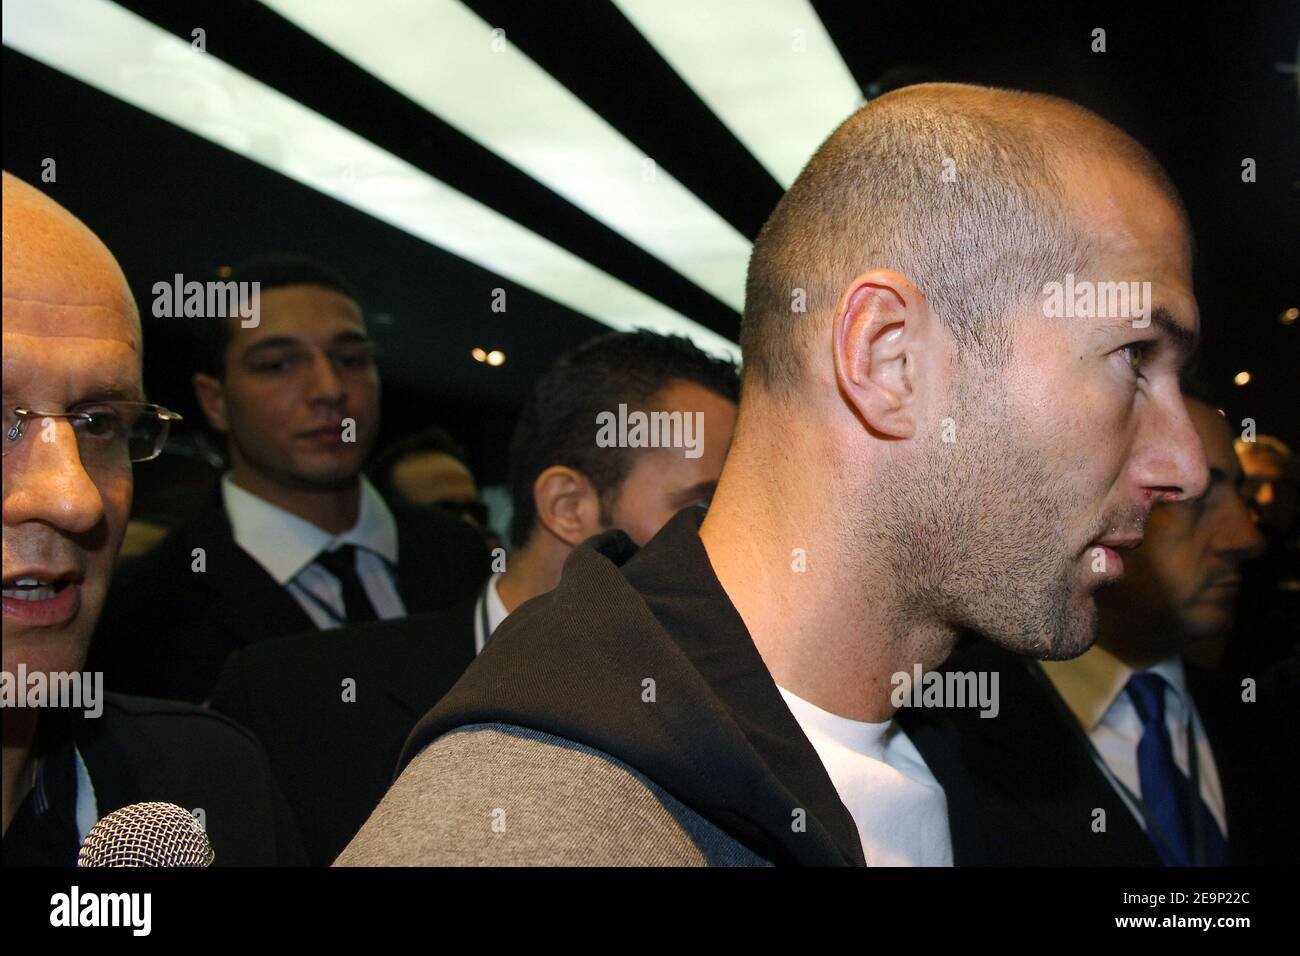 French former soccer player Zinedine Zidane attends the Adidas Flagship  store opening party on the Champs Elysees, in Paris, France, on October 24,  2006. Photo by Nicolas Gouhier/Cameleon/ABACAPRESS.COM Stock Photo - Alamy